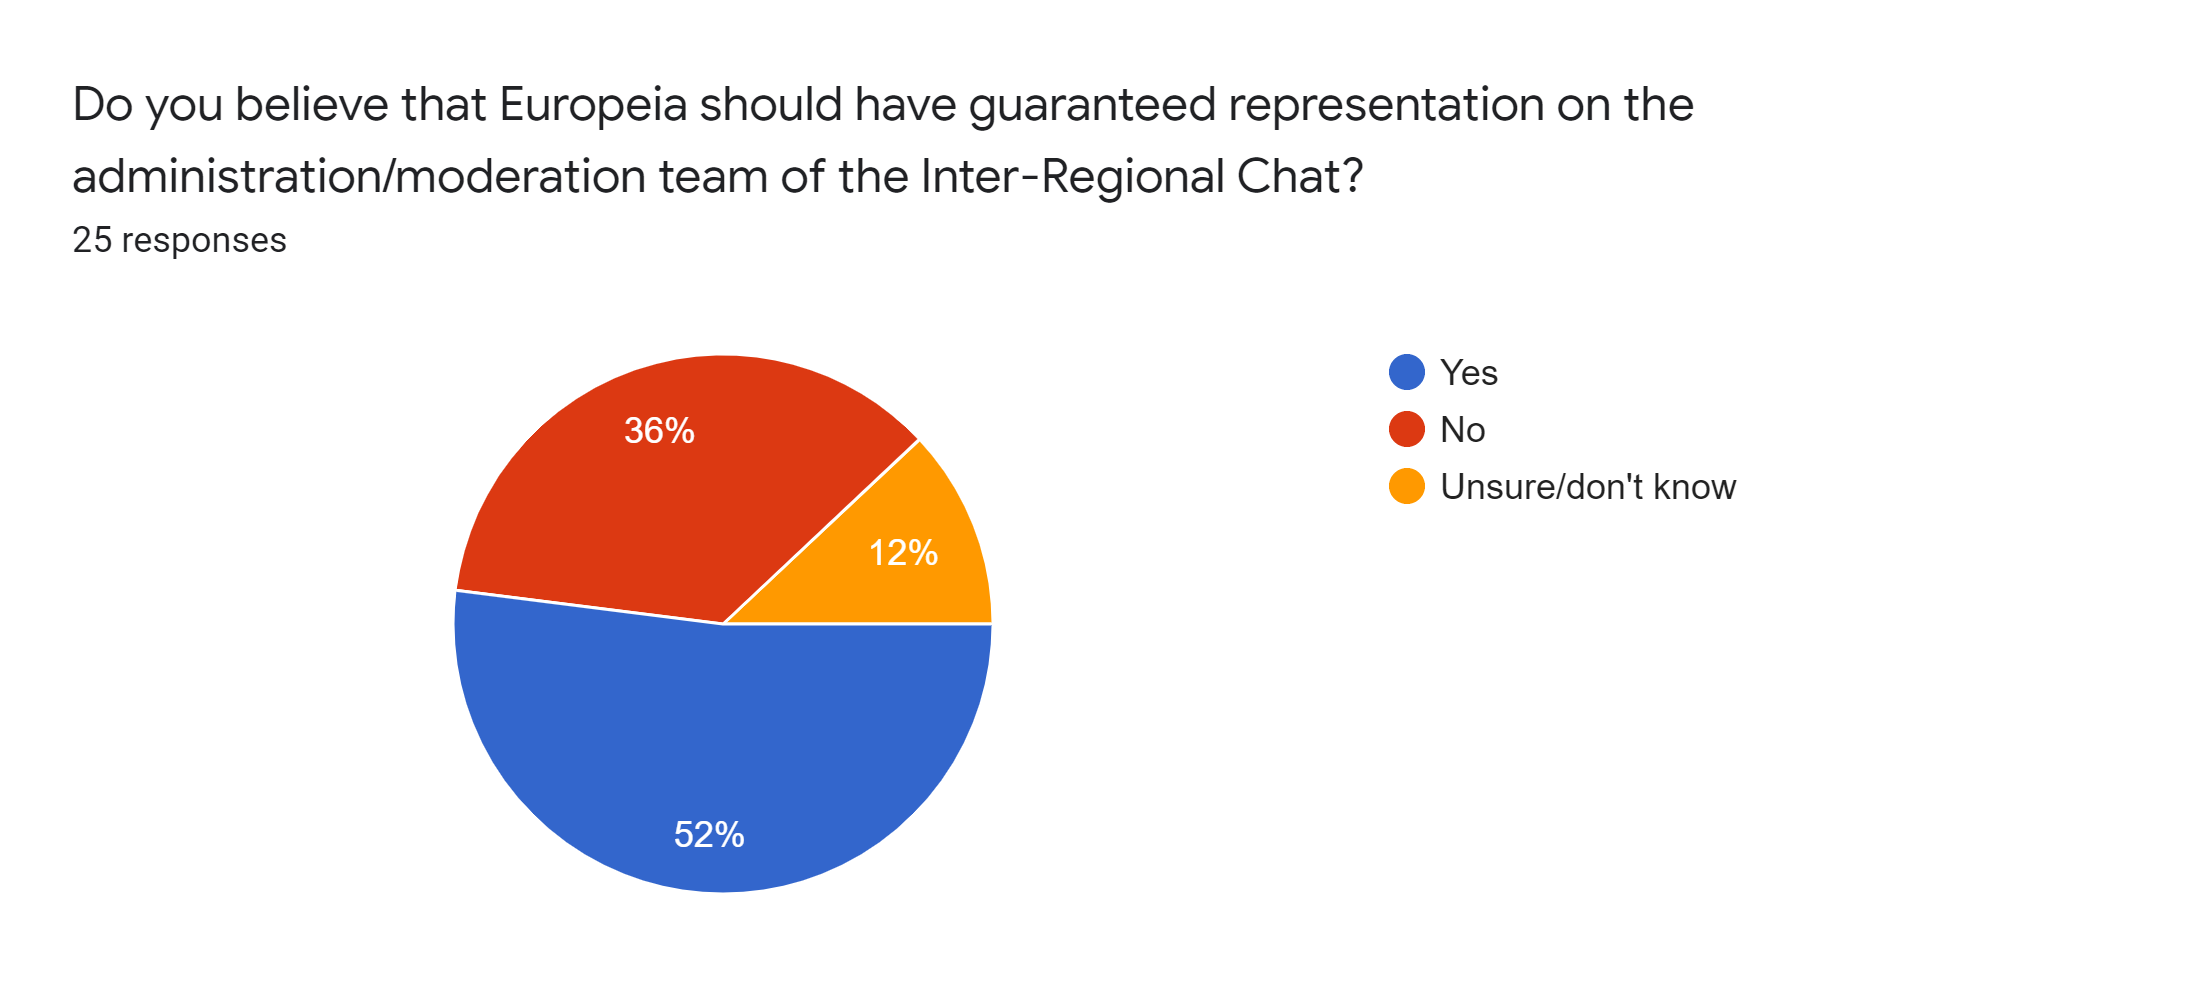 Forms response chart. Question title: Do you believe that Europeia should have guaranteed representation on the administration/moderation team of the Inter-Regional Chat?. Number of responses: 25 responses.